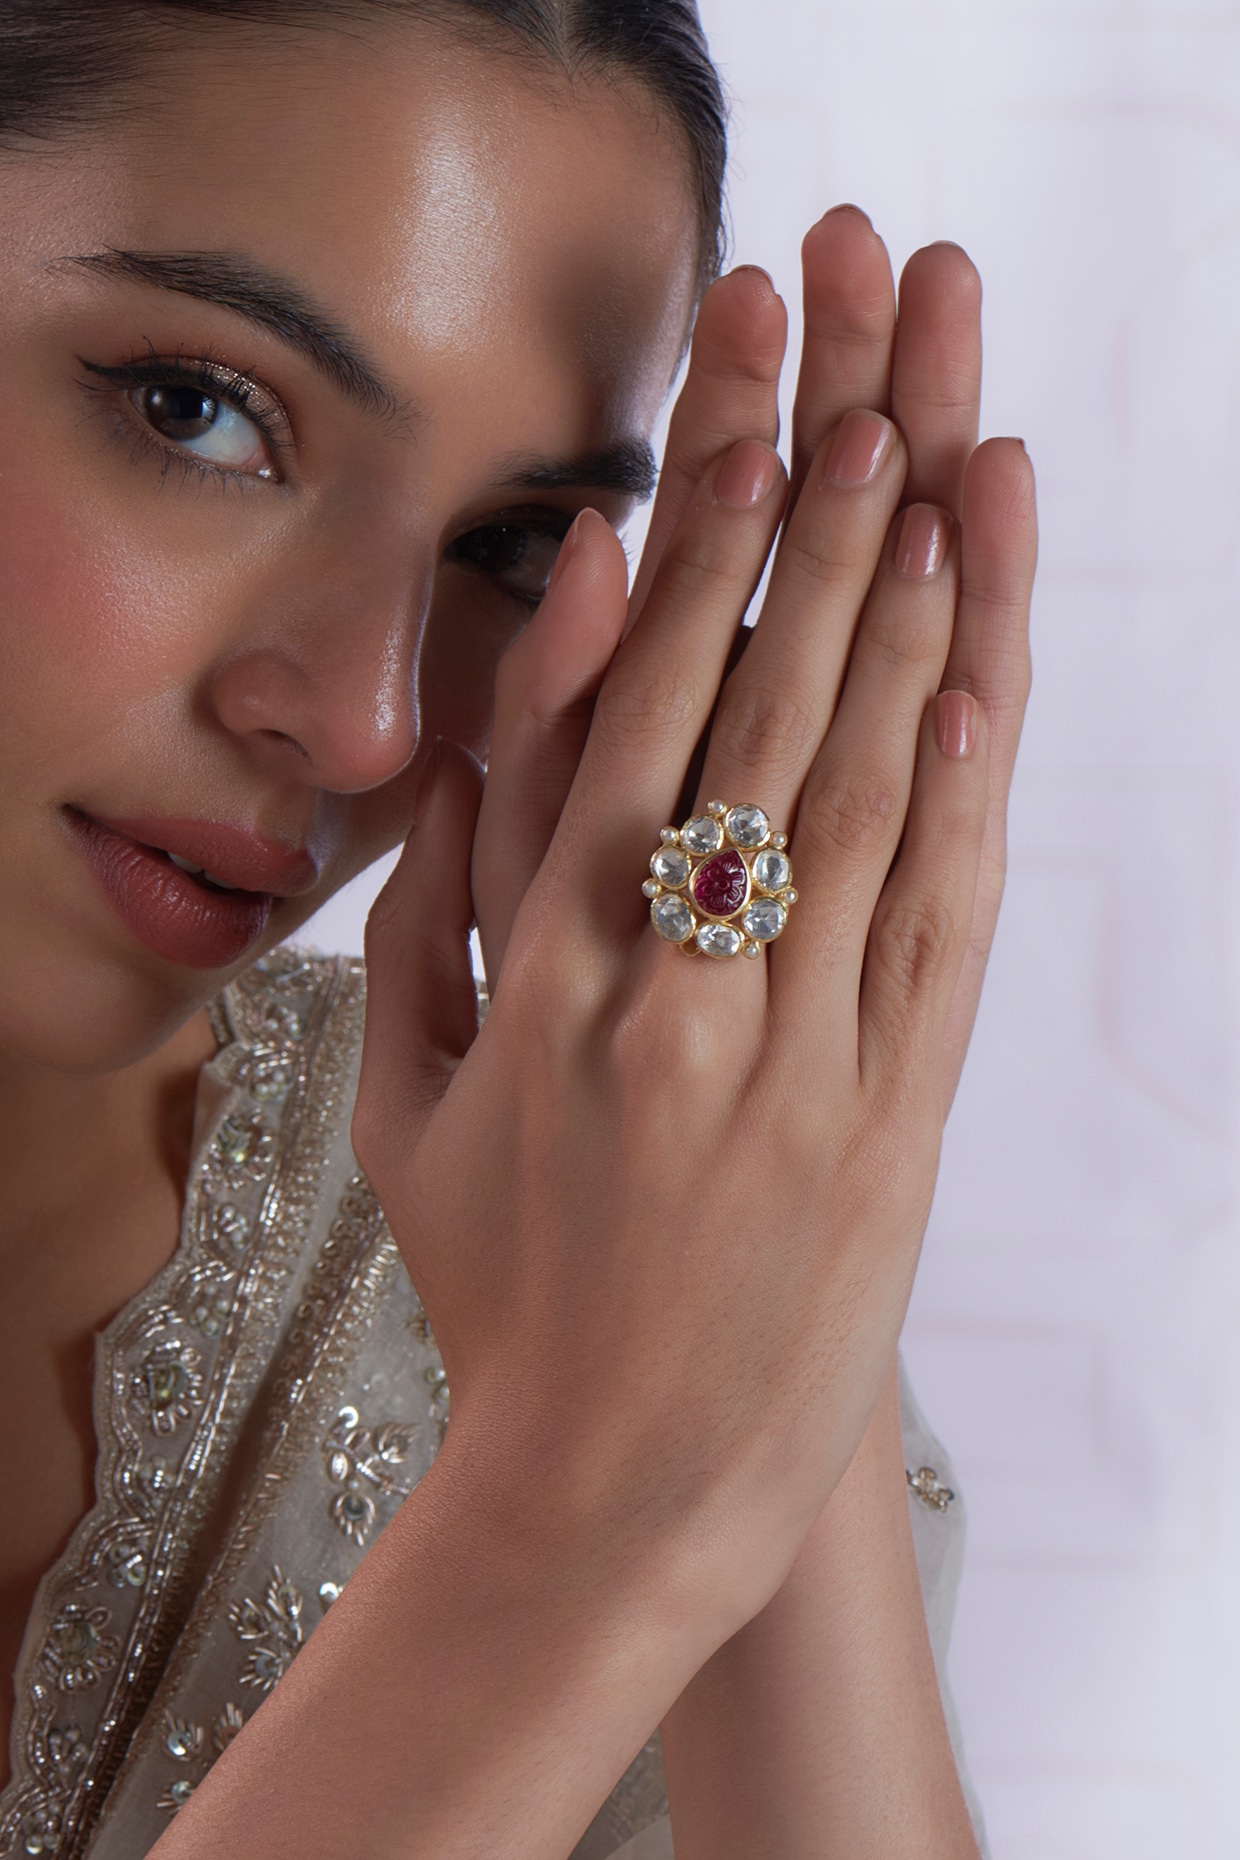 The Cocktail Rings Artificial Diamond for women can be the best wedding  gift for the bride. It is perfect for gifting and for personal use. Buy  online and get an exciting affordable